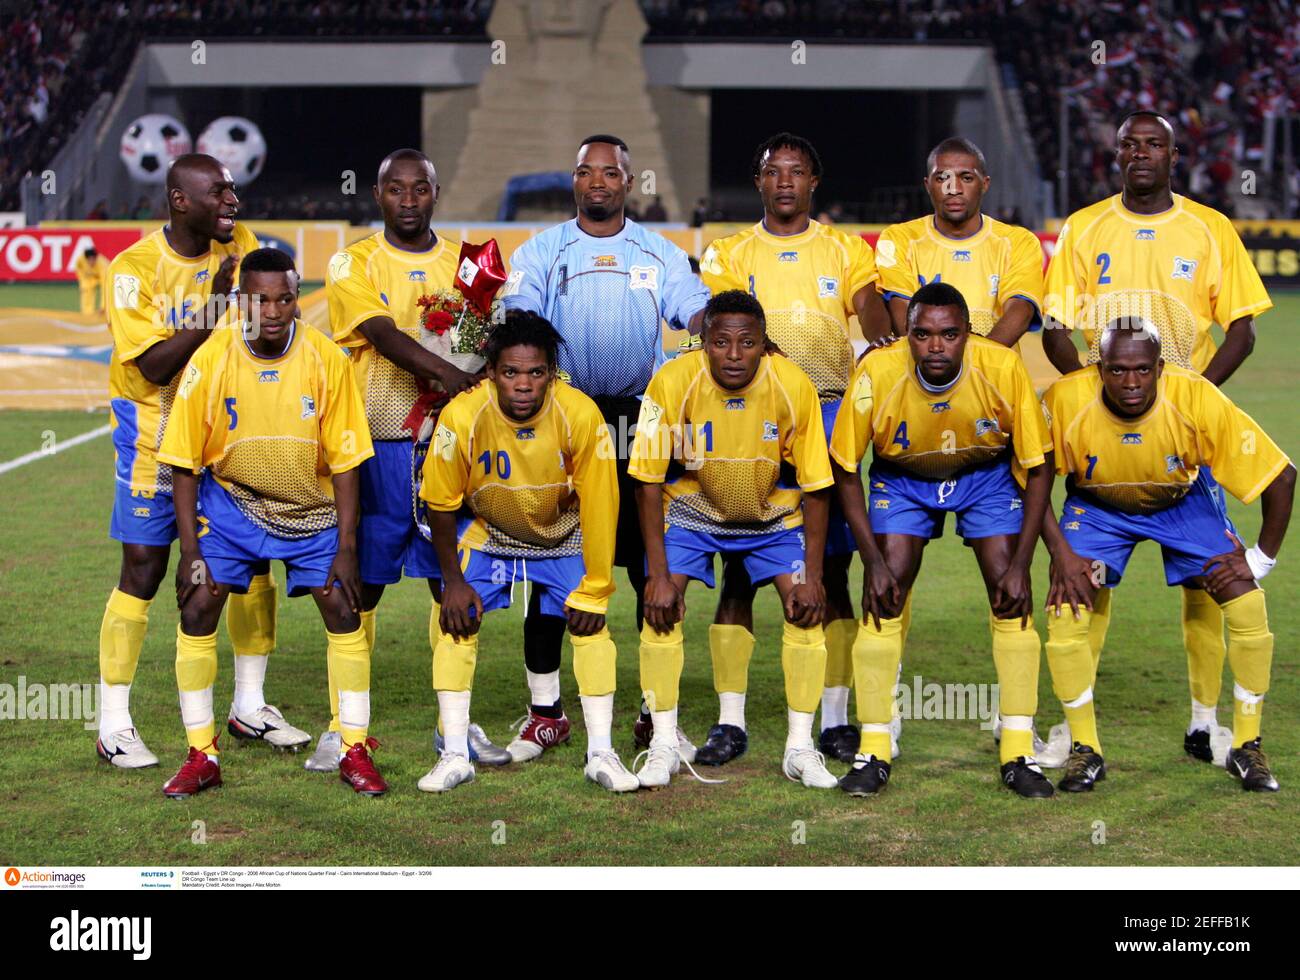 Football - Egypt v DR Congo - 2006 African Cup of Nations Quarter Final -  Cairo International Stadium - Egypt - 3/2/06 DR Congo Team Line up  Mandatory Credit: Action Images / Alex Morton Stock Photo - Alamy